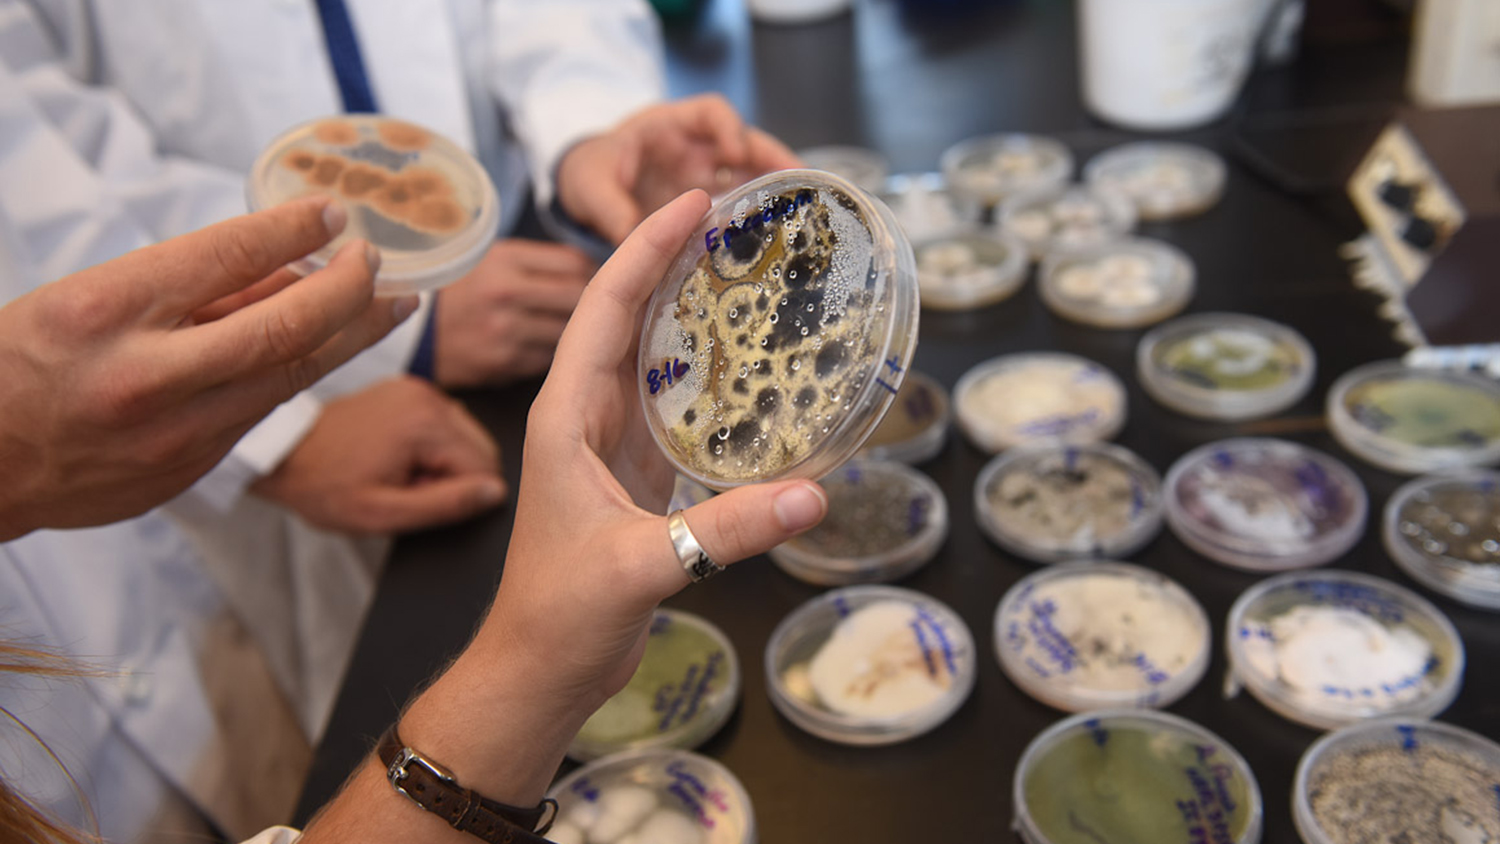 Hands holding cultures of fungi isolated from soil.